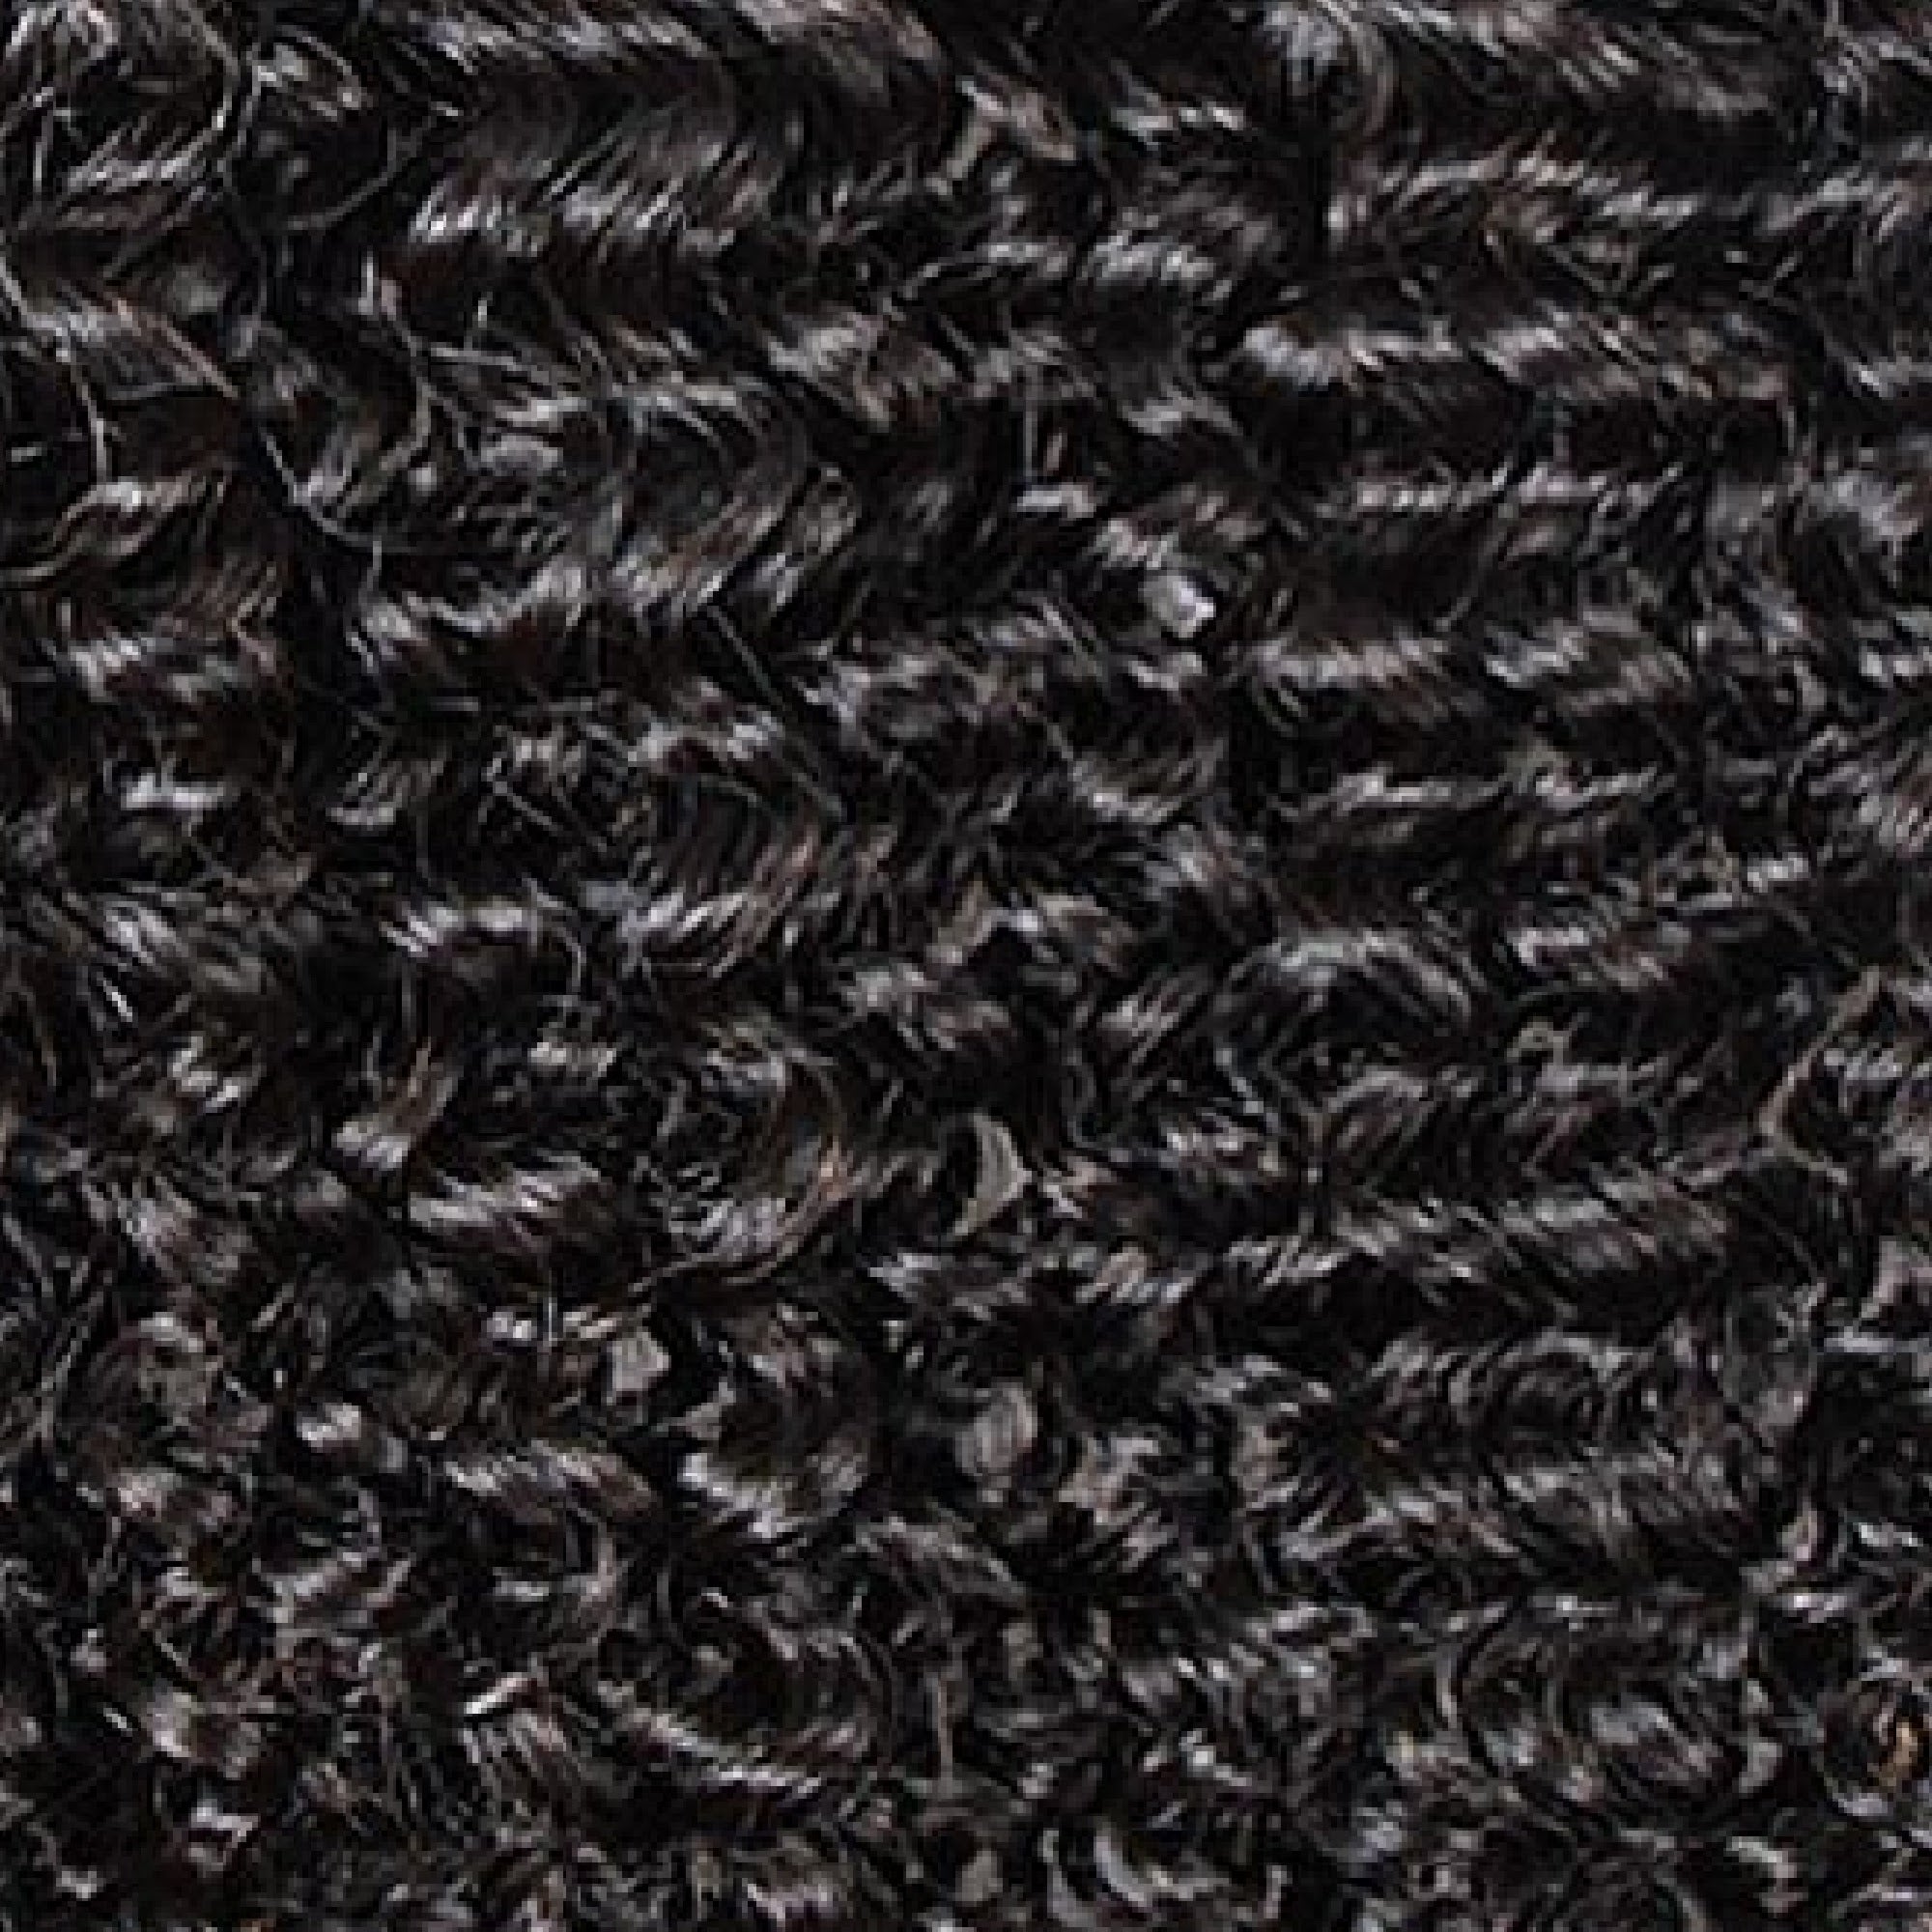 Afro Kinky Curly Tape-Ins (40pcs)